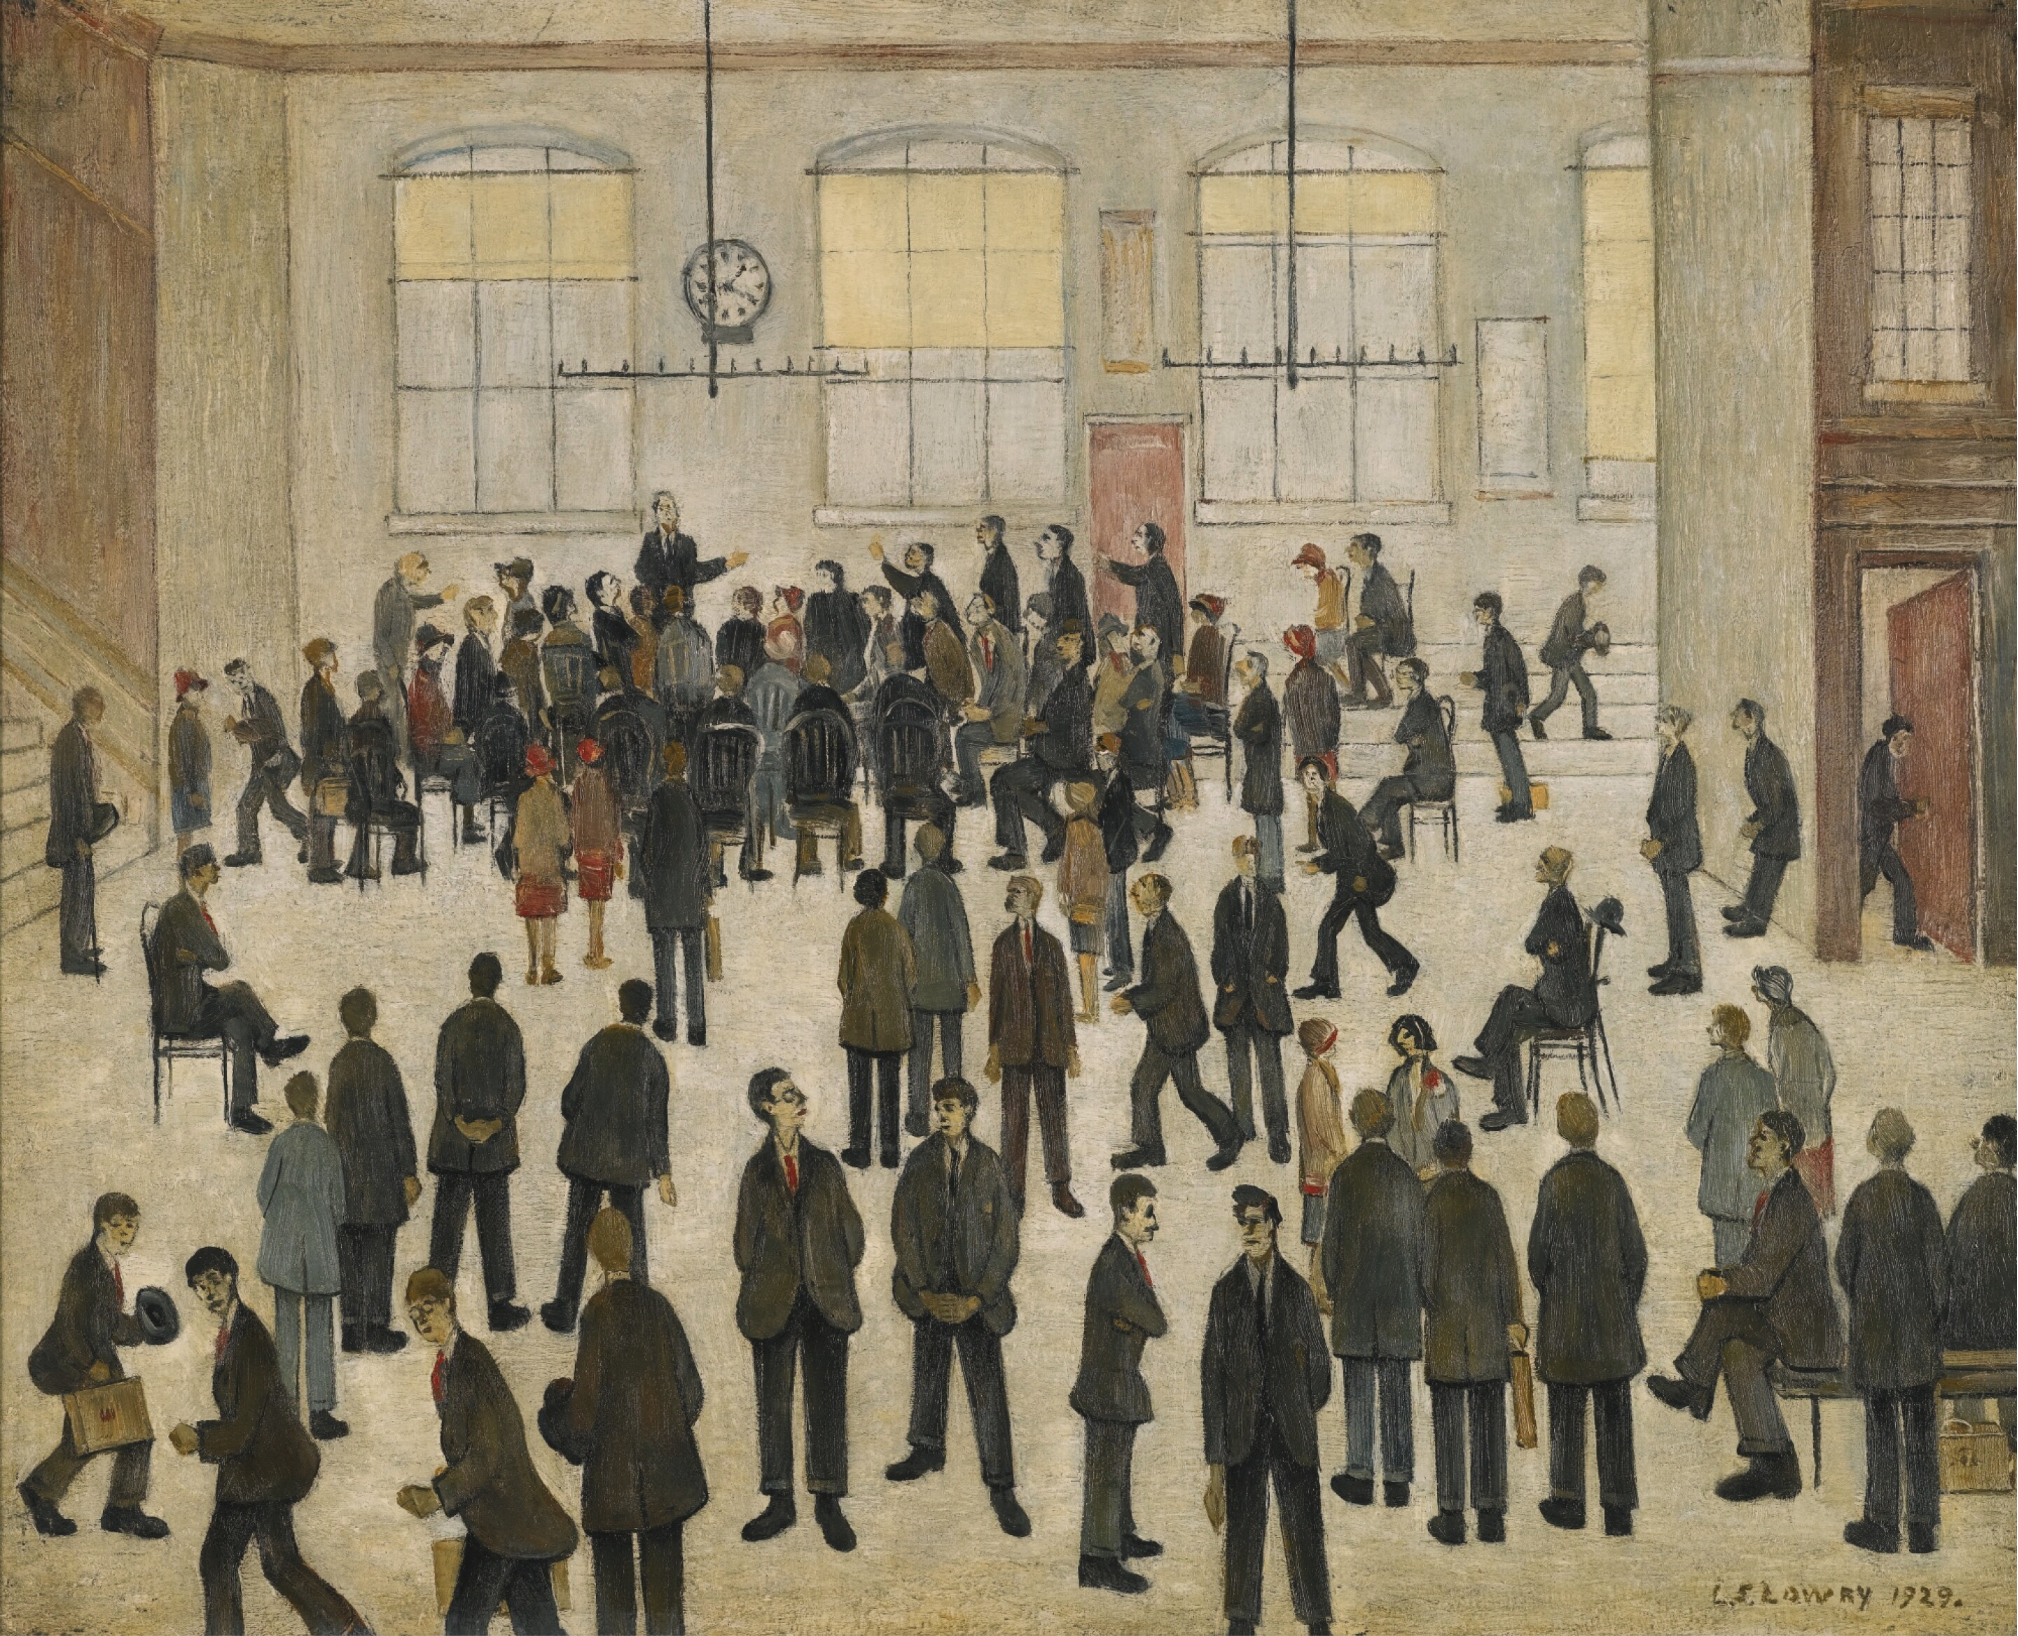 Election Time (1929) by Laurence Stephen Lowry (1887 - 1976), English artist.